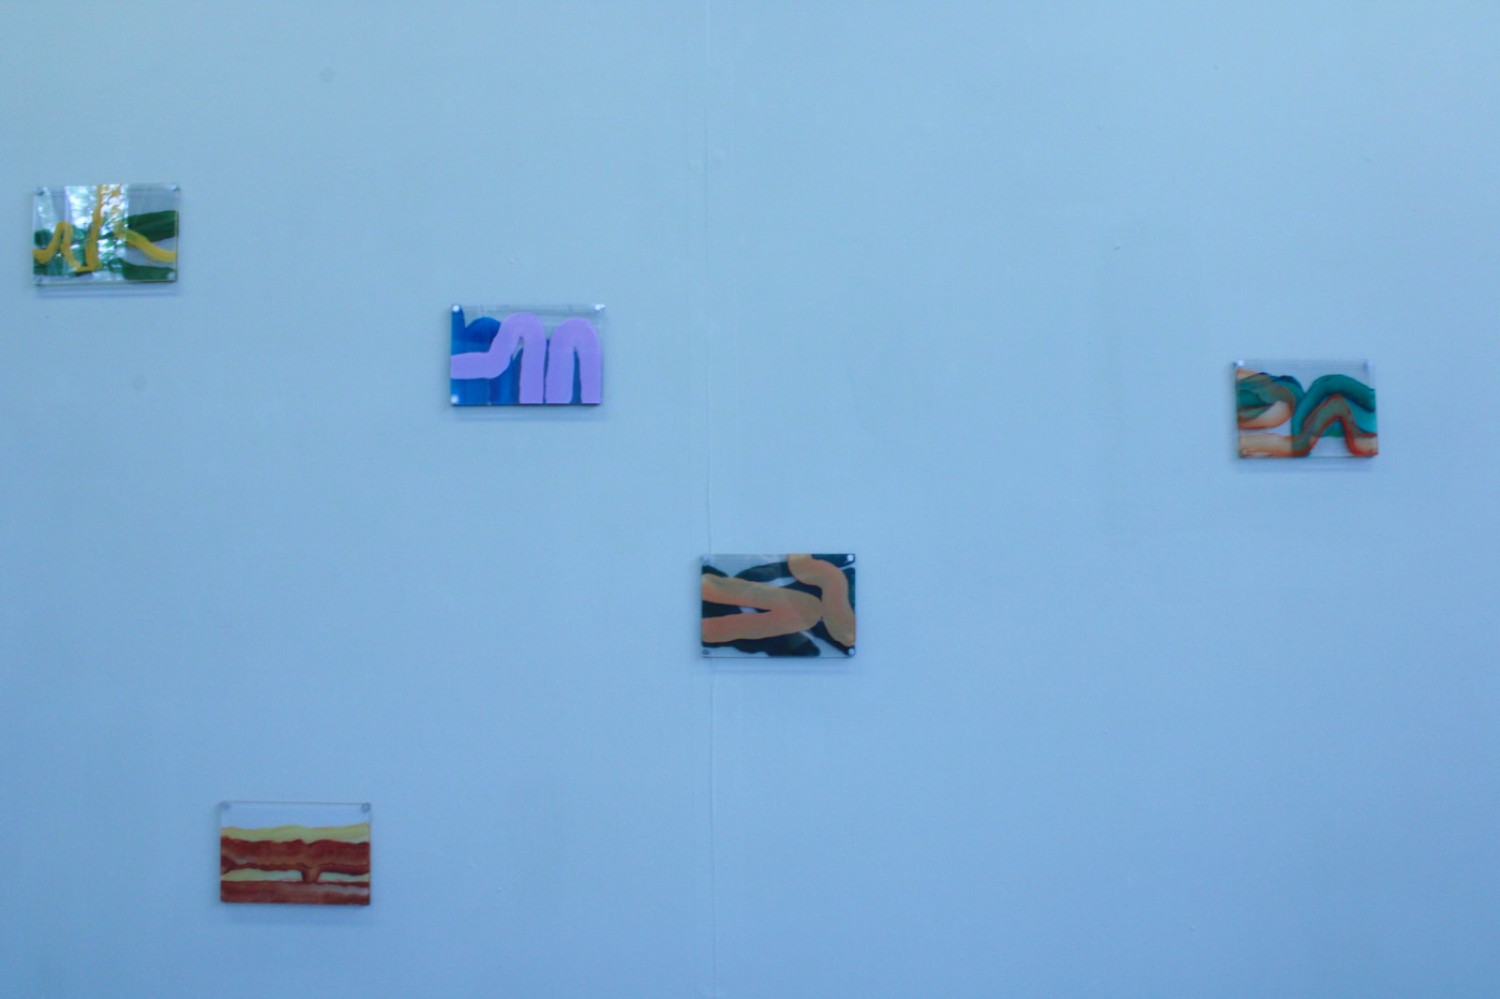 Perspex paintings, Final Installation, 10 x 15cm